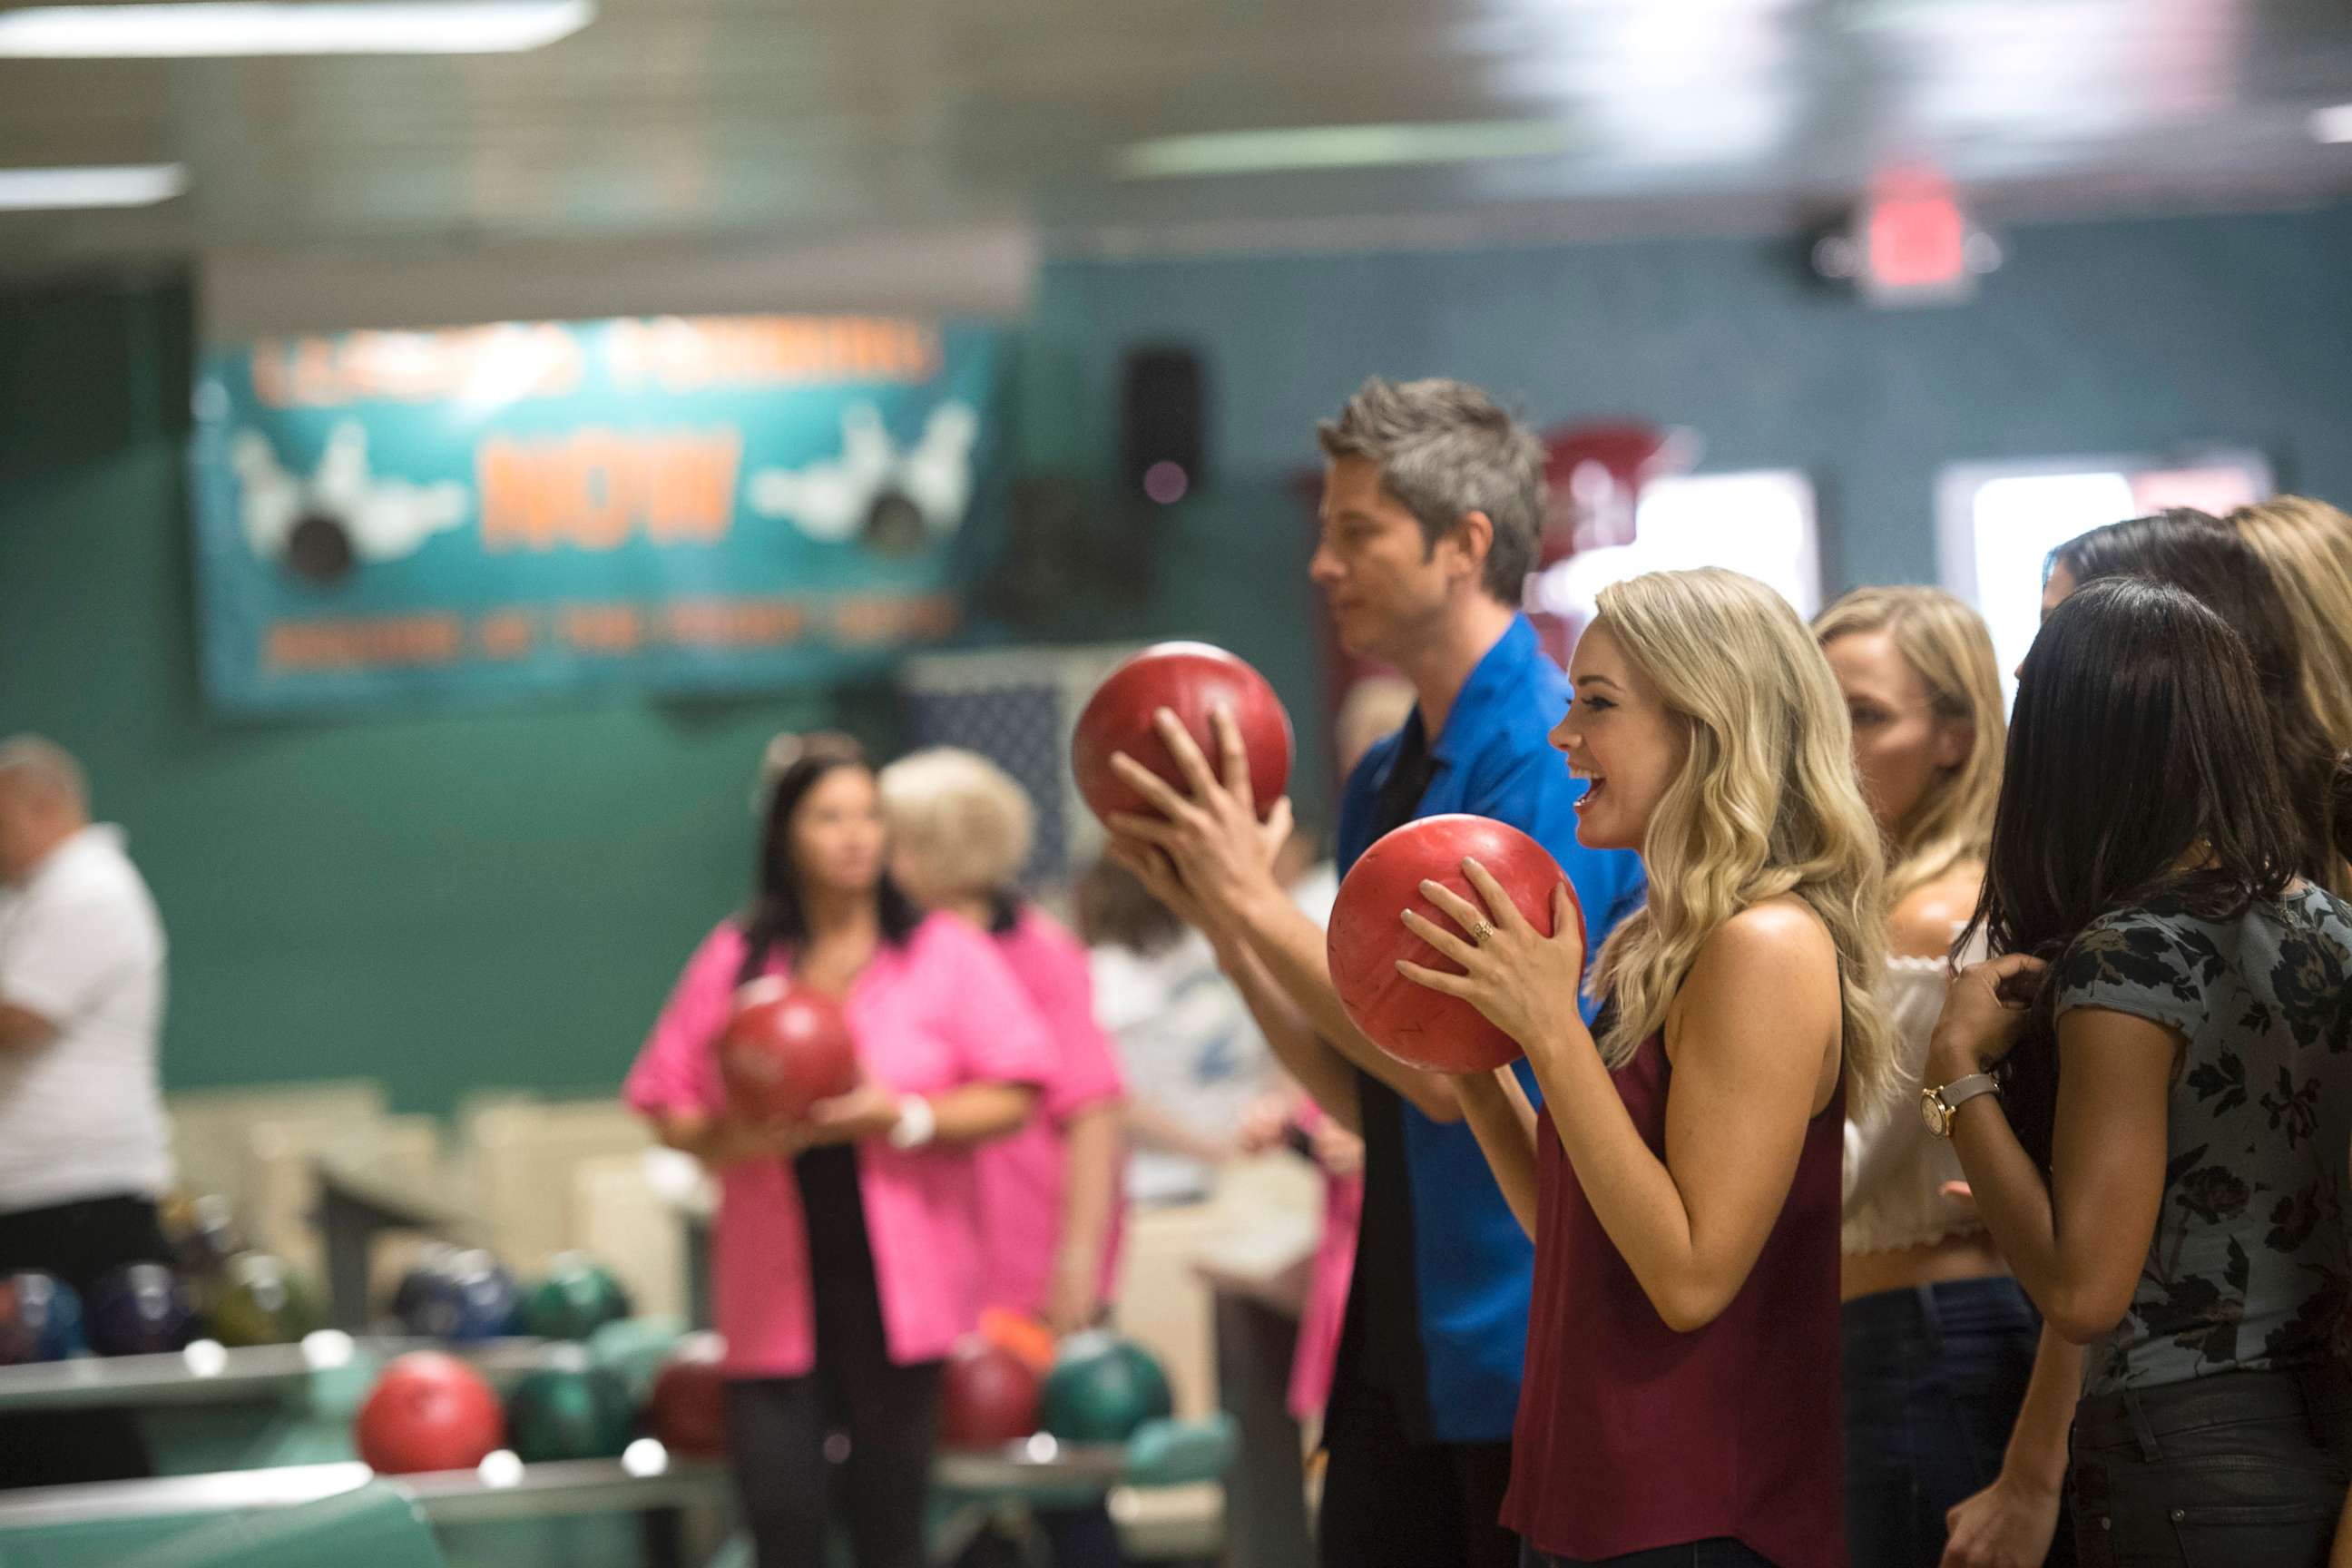 PHOTO: Arie Luyendyk Jr. and Jenna during a competitive day of bowling with the winner going to a private after-party, on "The Bachelor," Jan. 29, 2018, on The ABC Television Network.